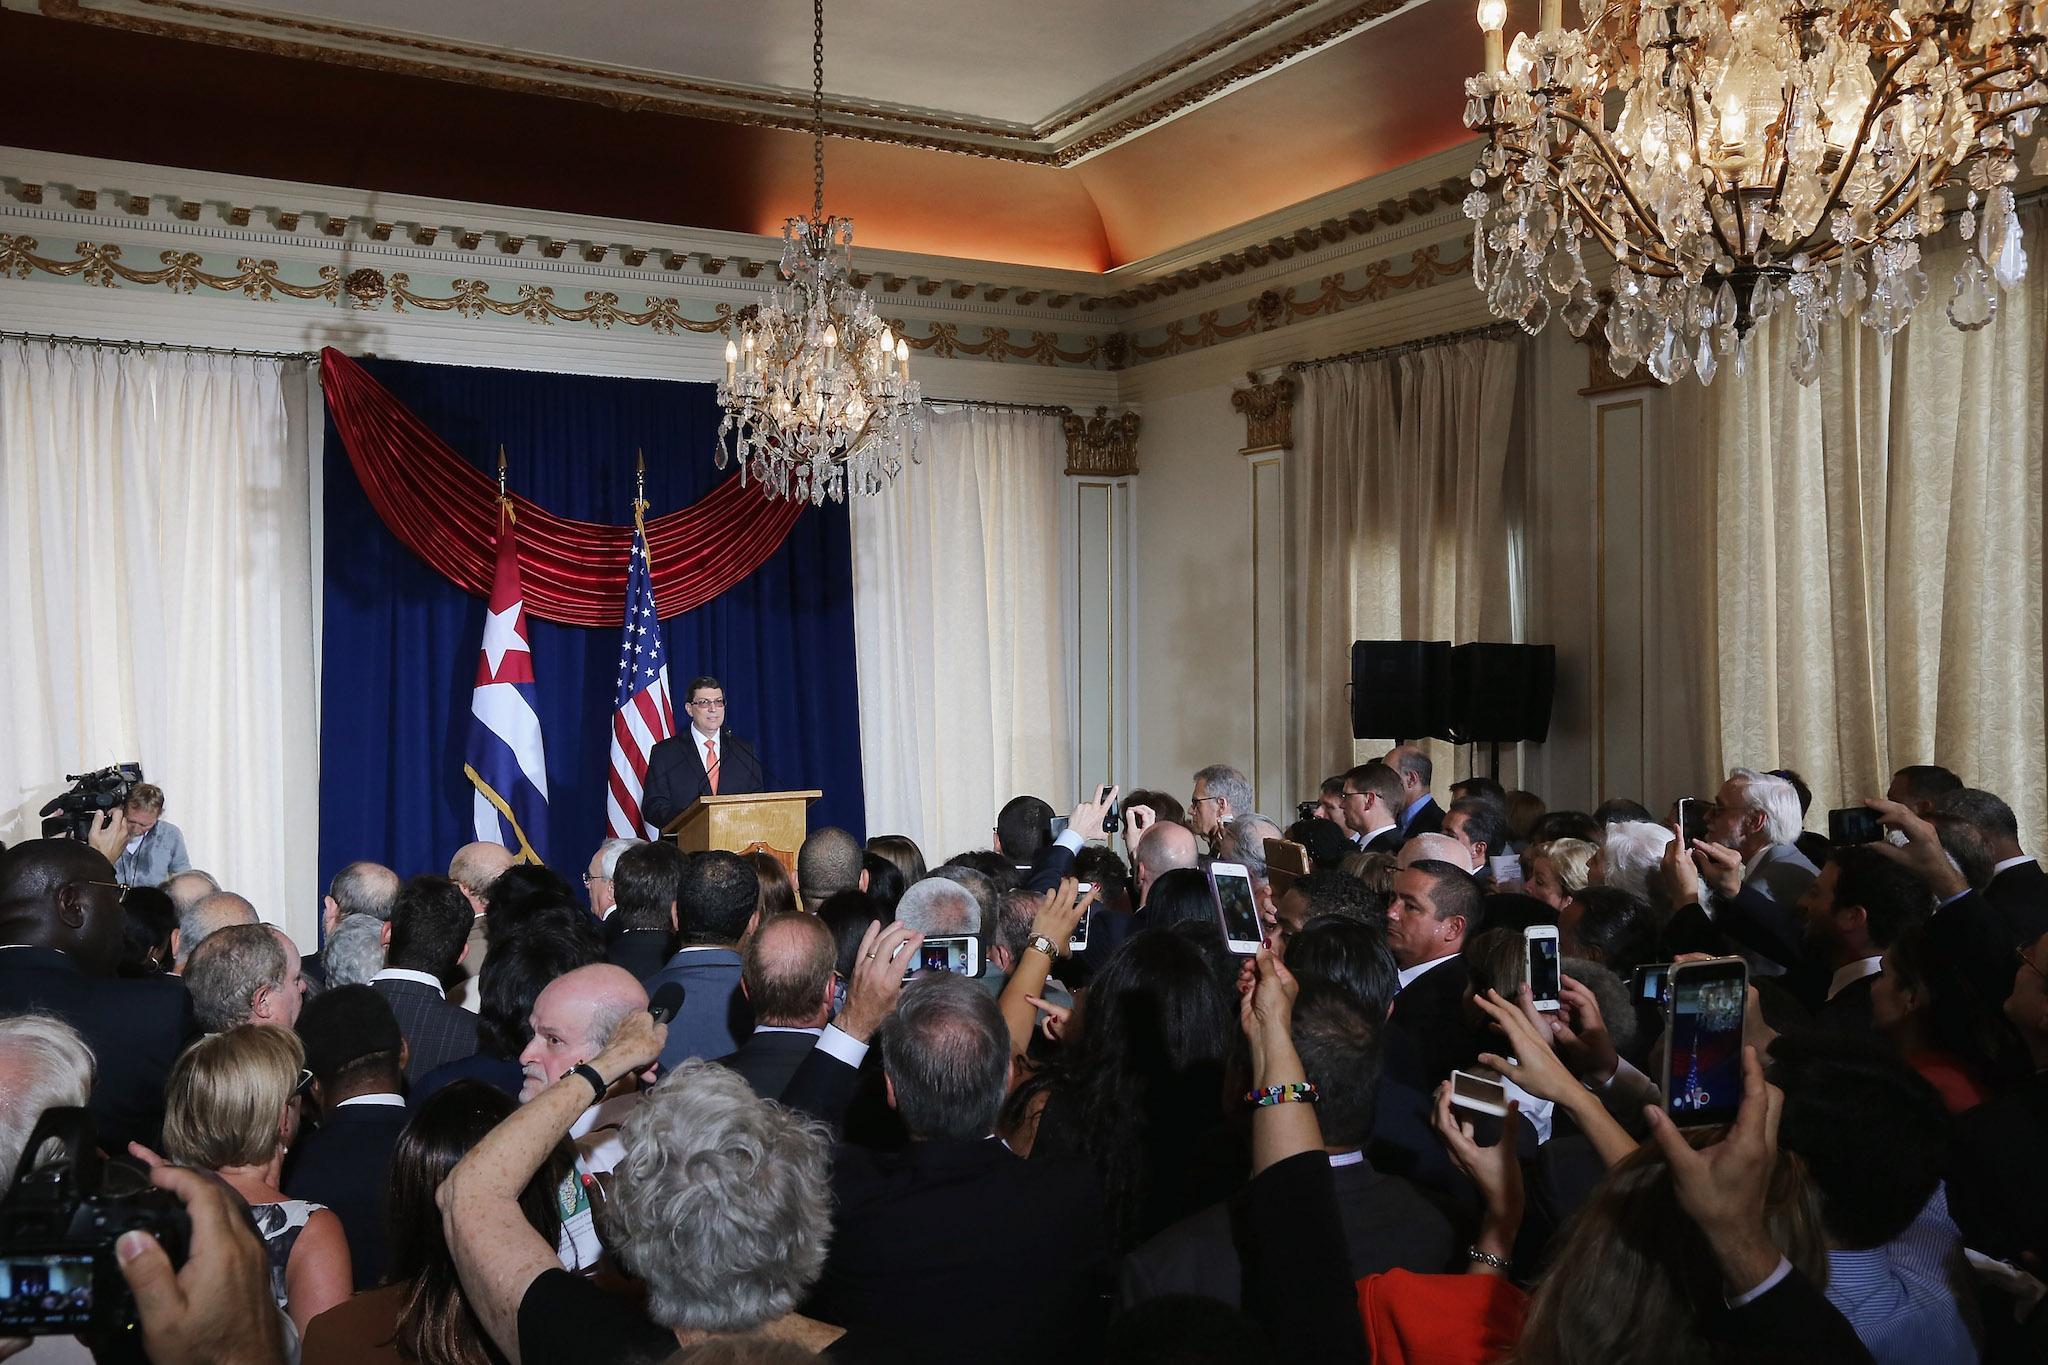 Cuban Foreign Minister Bruno Rodriguez delivers remarks during the re-opening ceremony for the Cuban embassy July 20, 2015 in Washington, DC